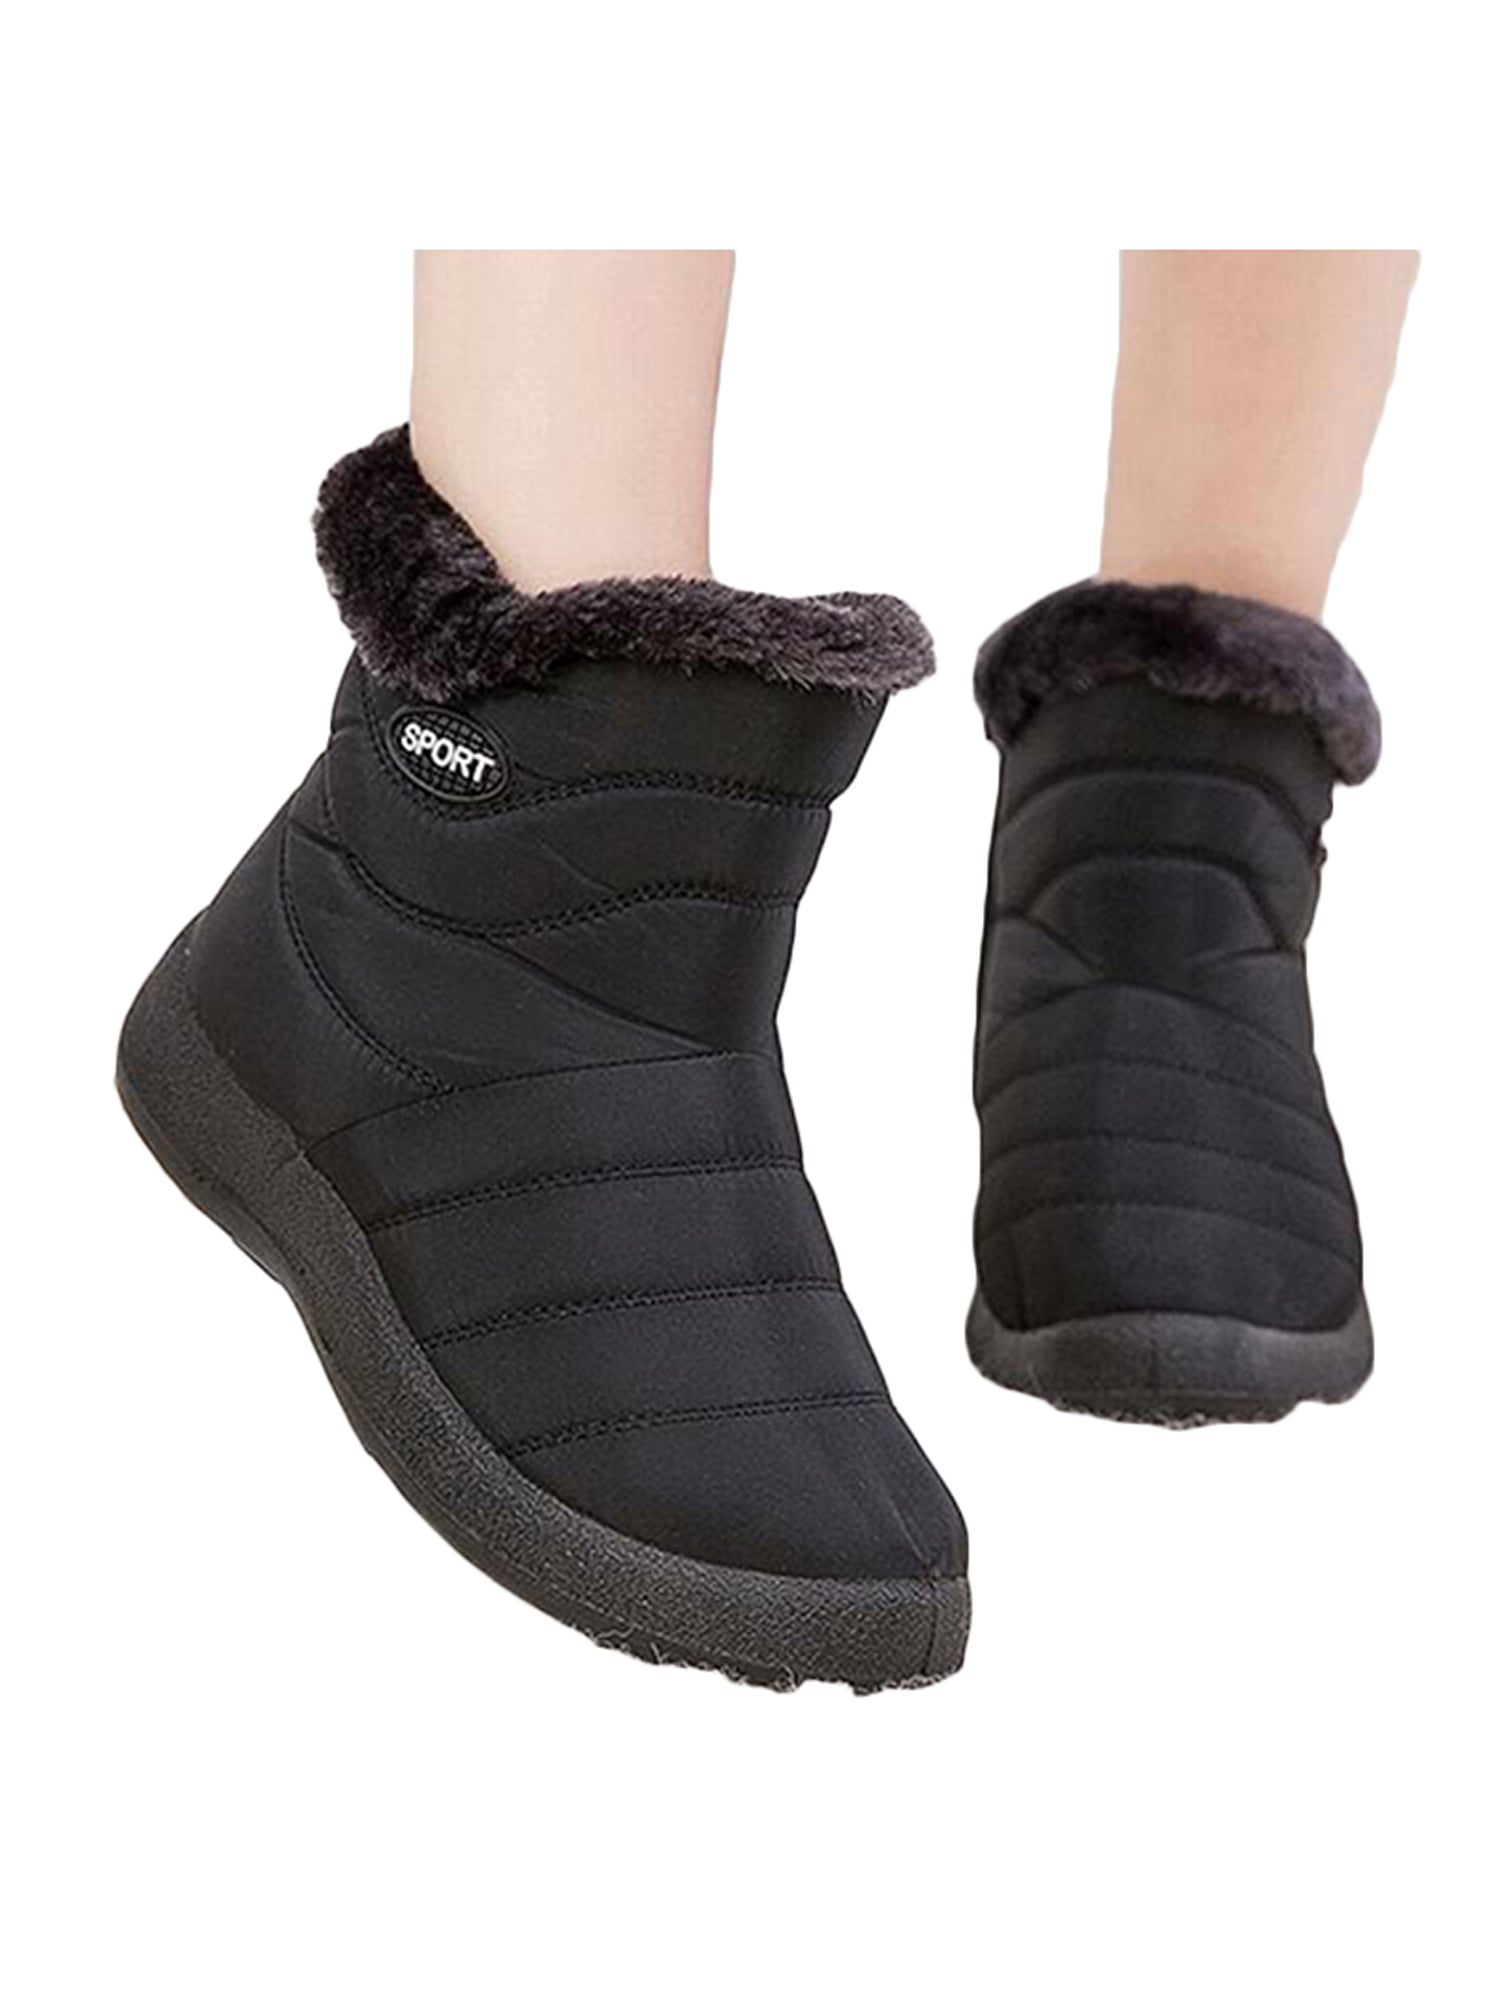 Womens Winter Snow Boots for Women with Arch Support Outdoor Warm Fur Lining Ankle Booties Zipper Waterproof Comfortable Shoes